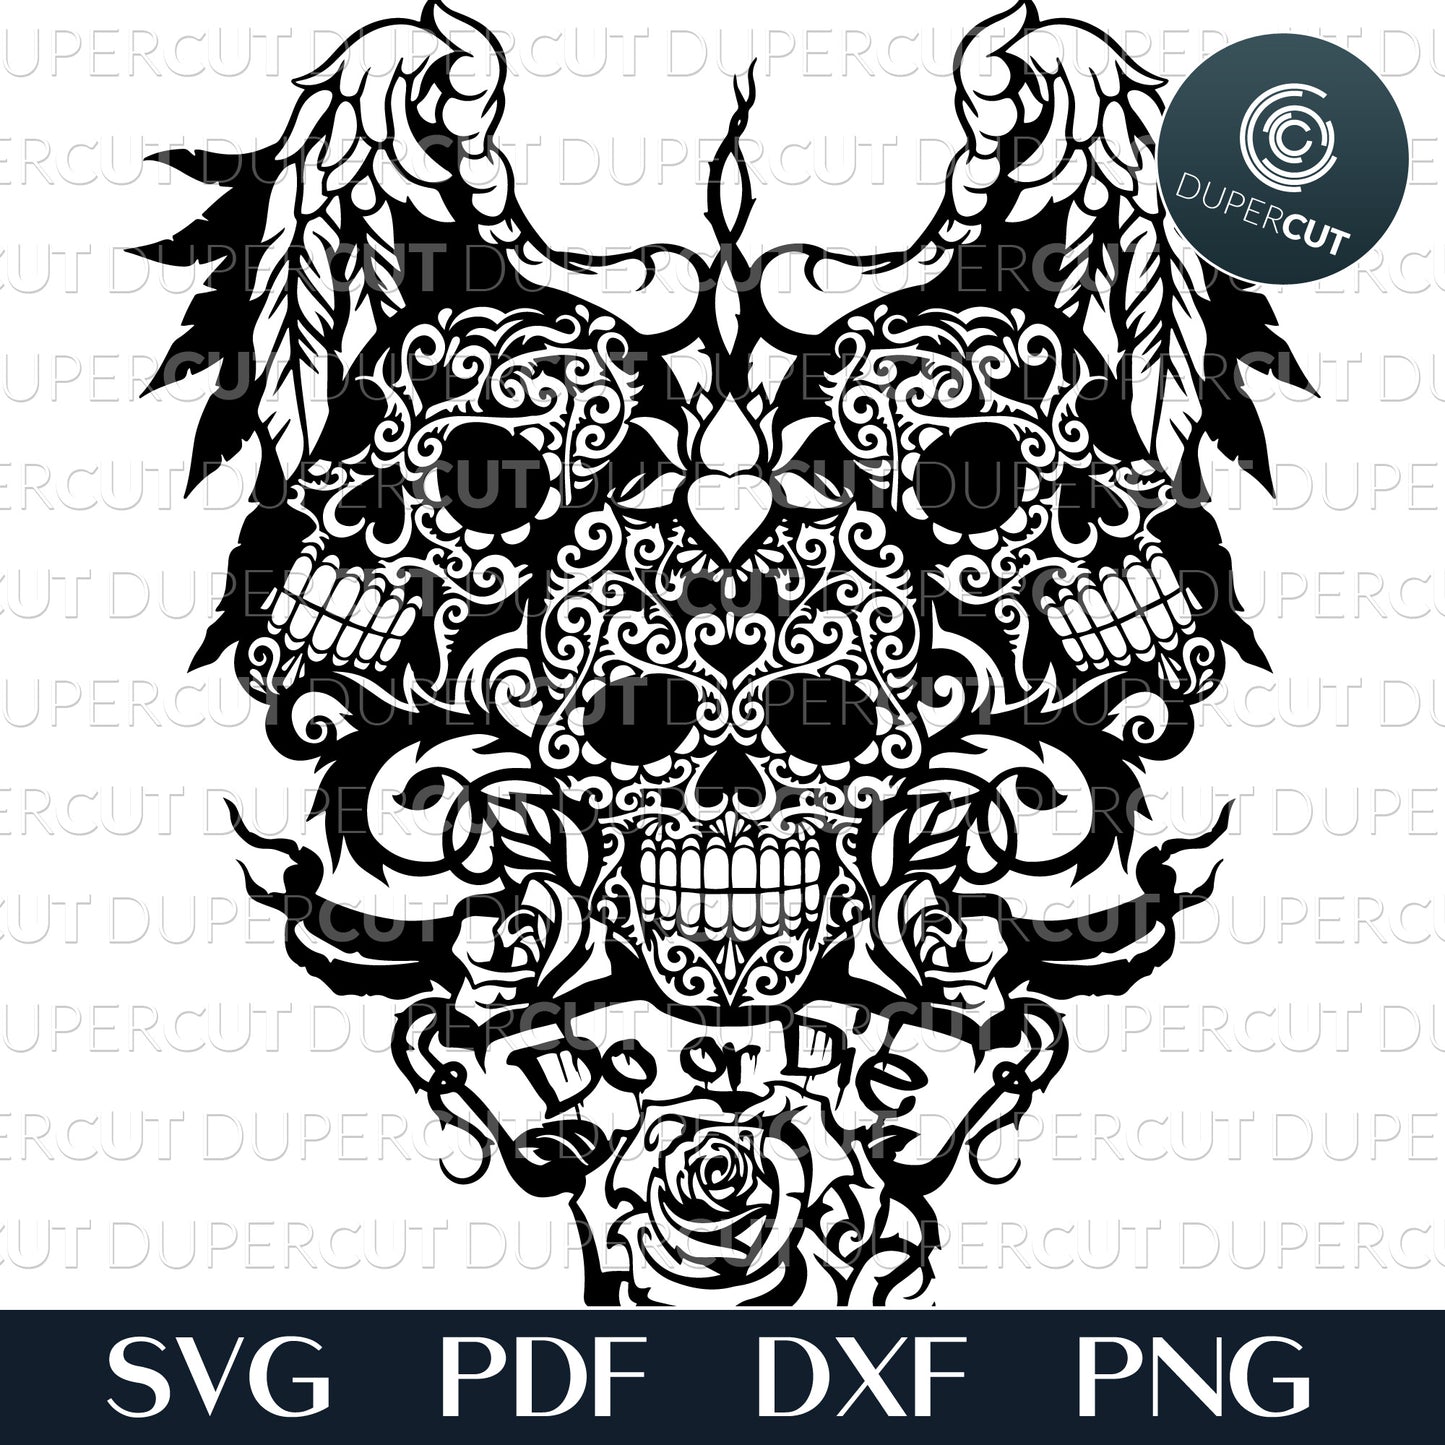 Winged skulls steampunk line art design. SVG PNG DXF cutting files for Glowforge, Cricut, Silhouette cameo, laser engraving.